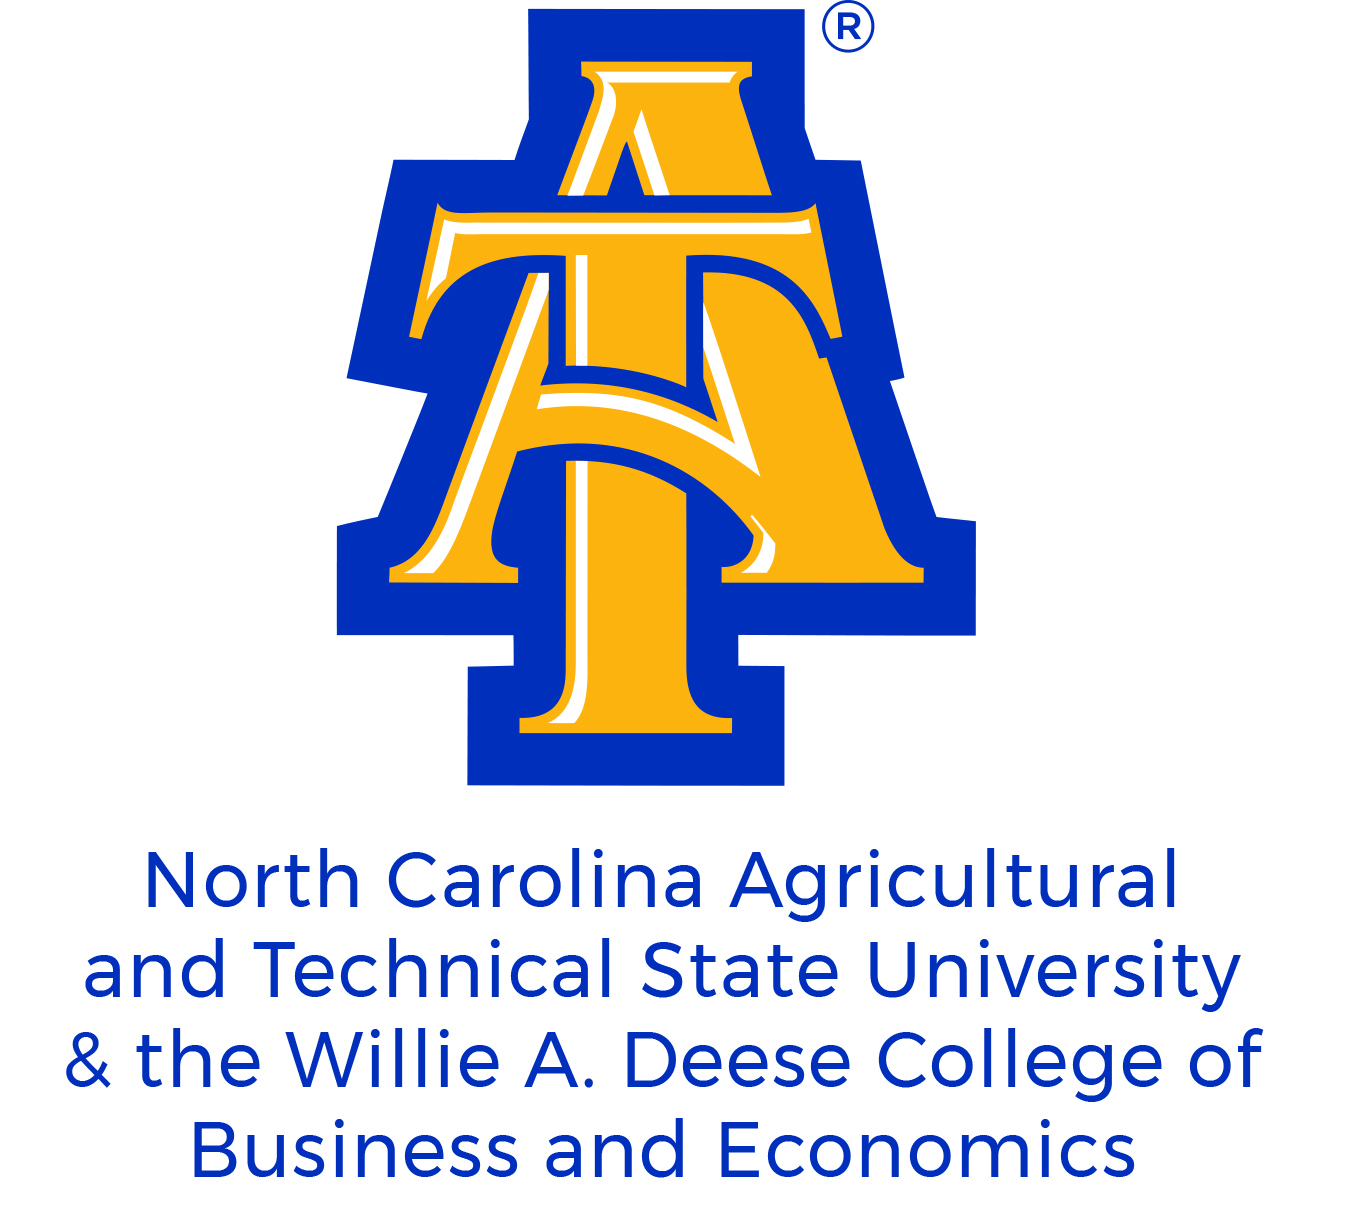 NC A&T State University & the Willie A. Deese College of Business and Economics Logo